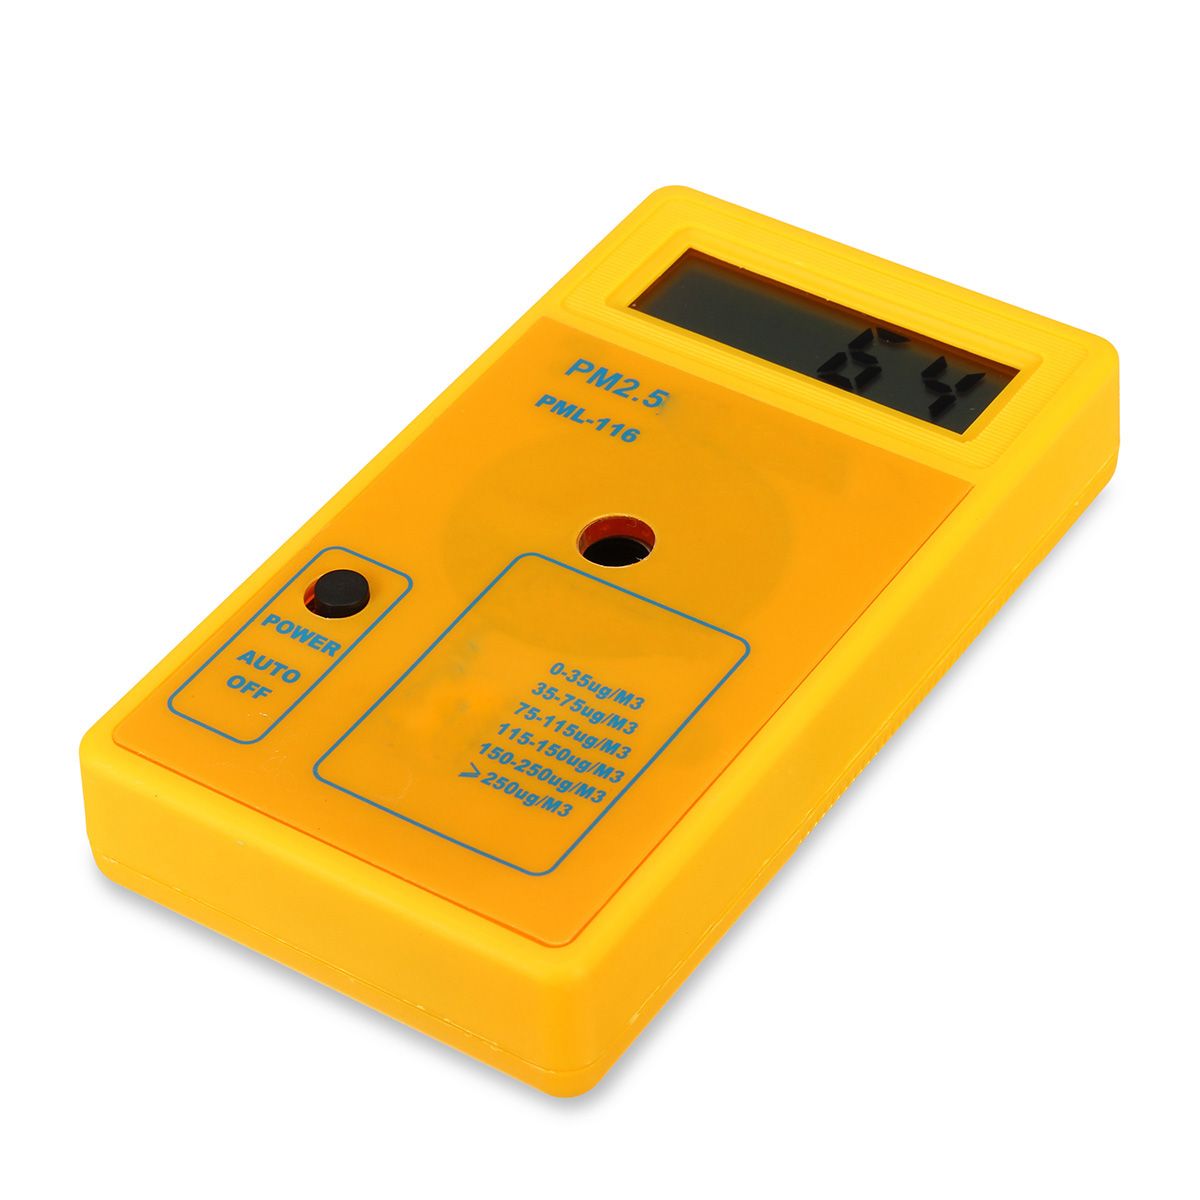 PM25-Particle-Detector-Haze-Dust-AirQuality-Monitoring-Analyzer-Meter-Sensor-1257865